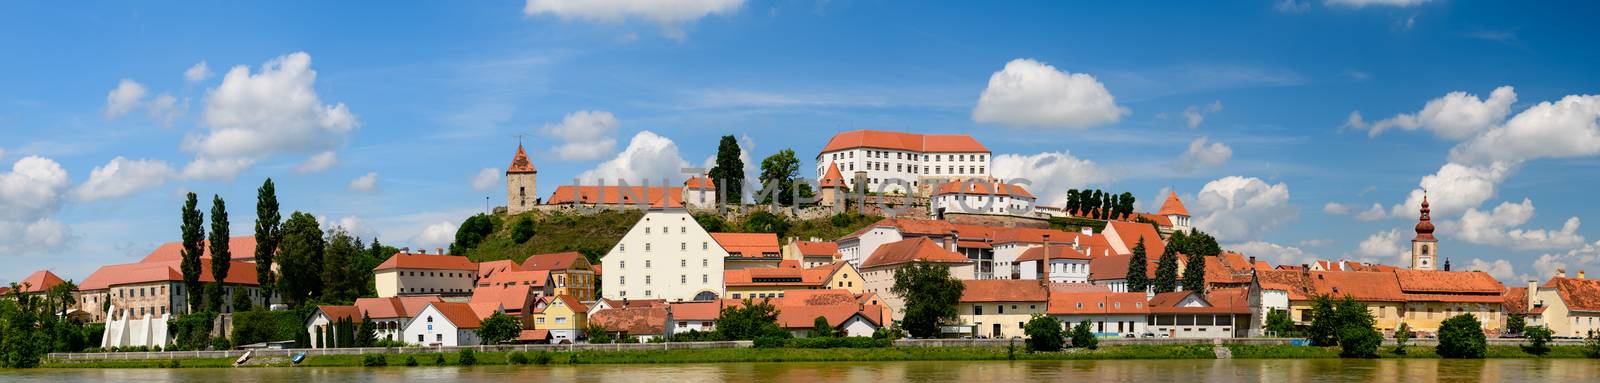 Ptuj, Slovenia, panoramic shot of oldest city in Slovenia with a castle overlooking the old town from a hill, clouds time lapse by asafaric